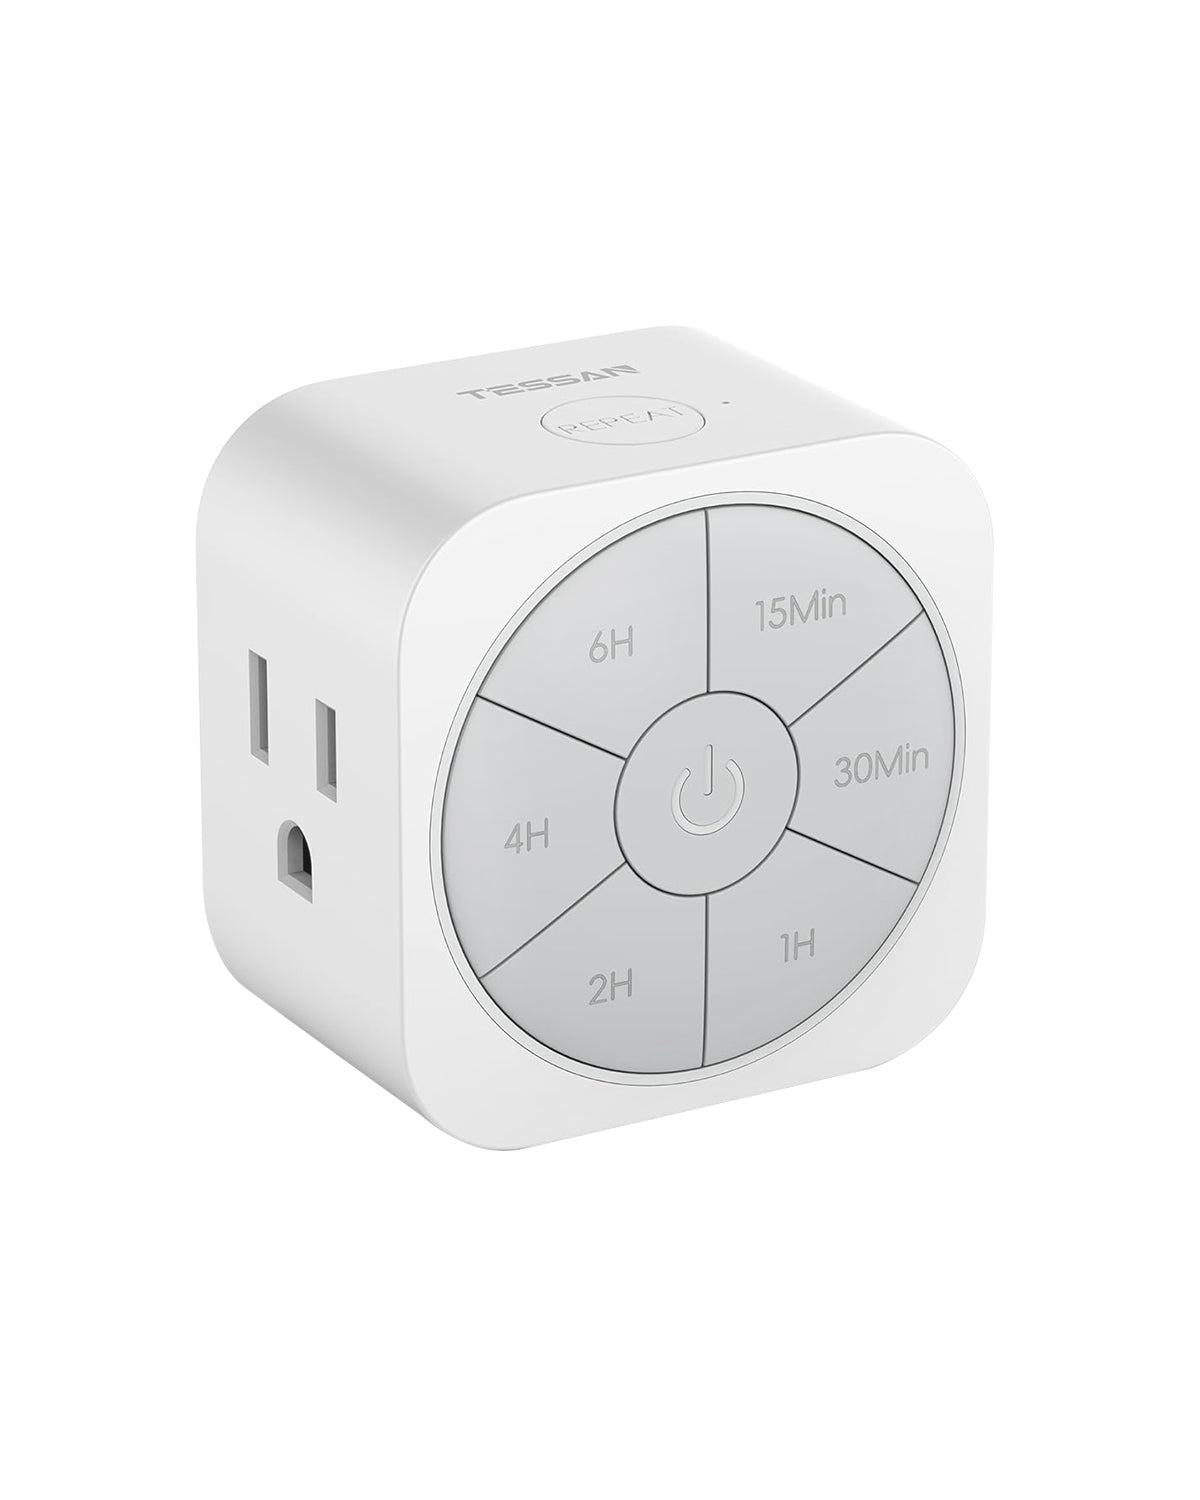 Timer Outlet Indoor, Countdown Electrical Outlet Timer Up to 6H